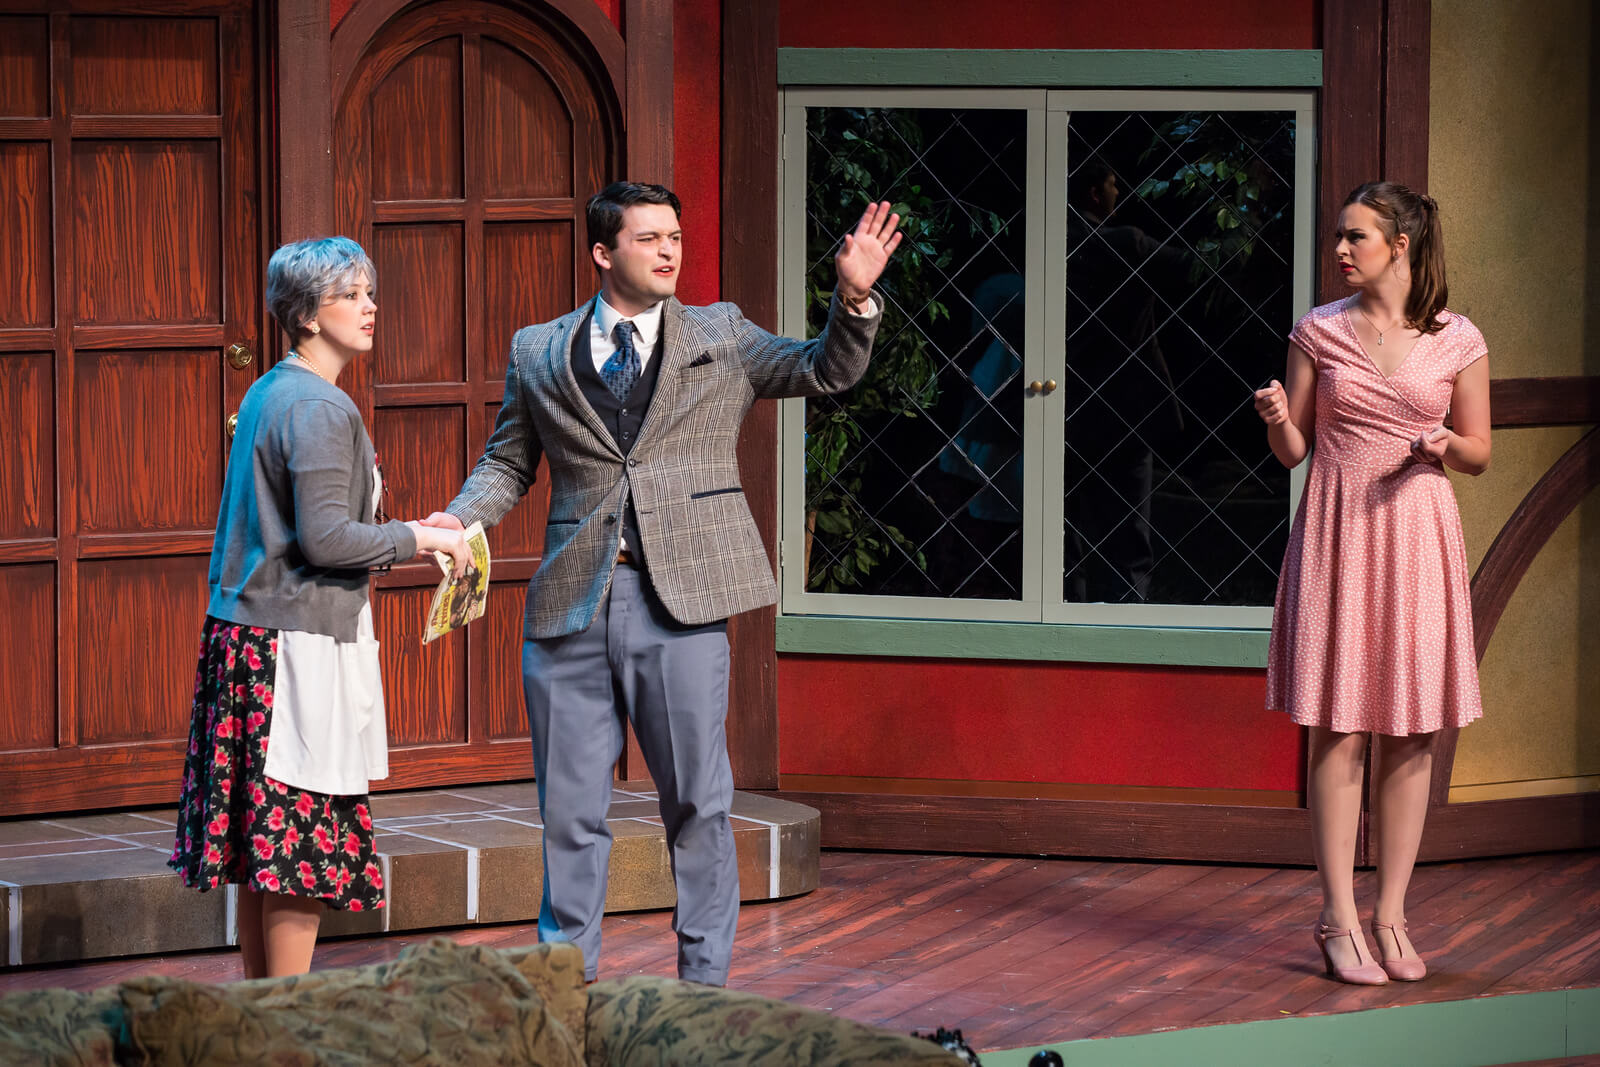 Three students on costume during the "Noises Off" performance.